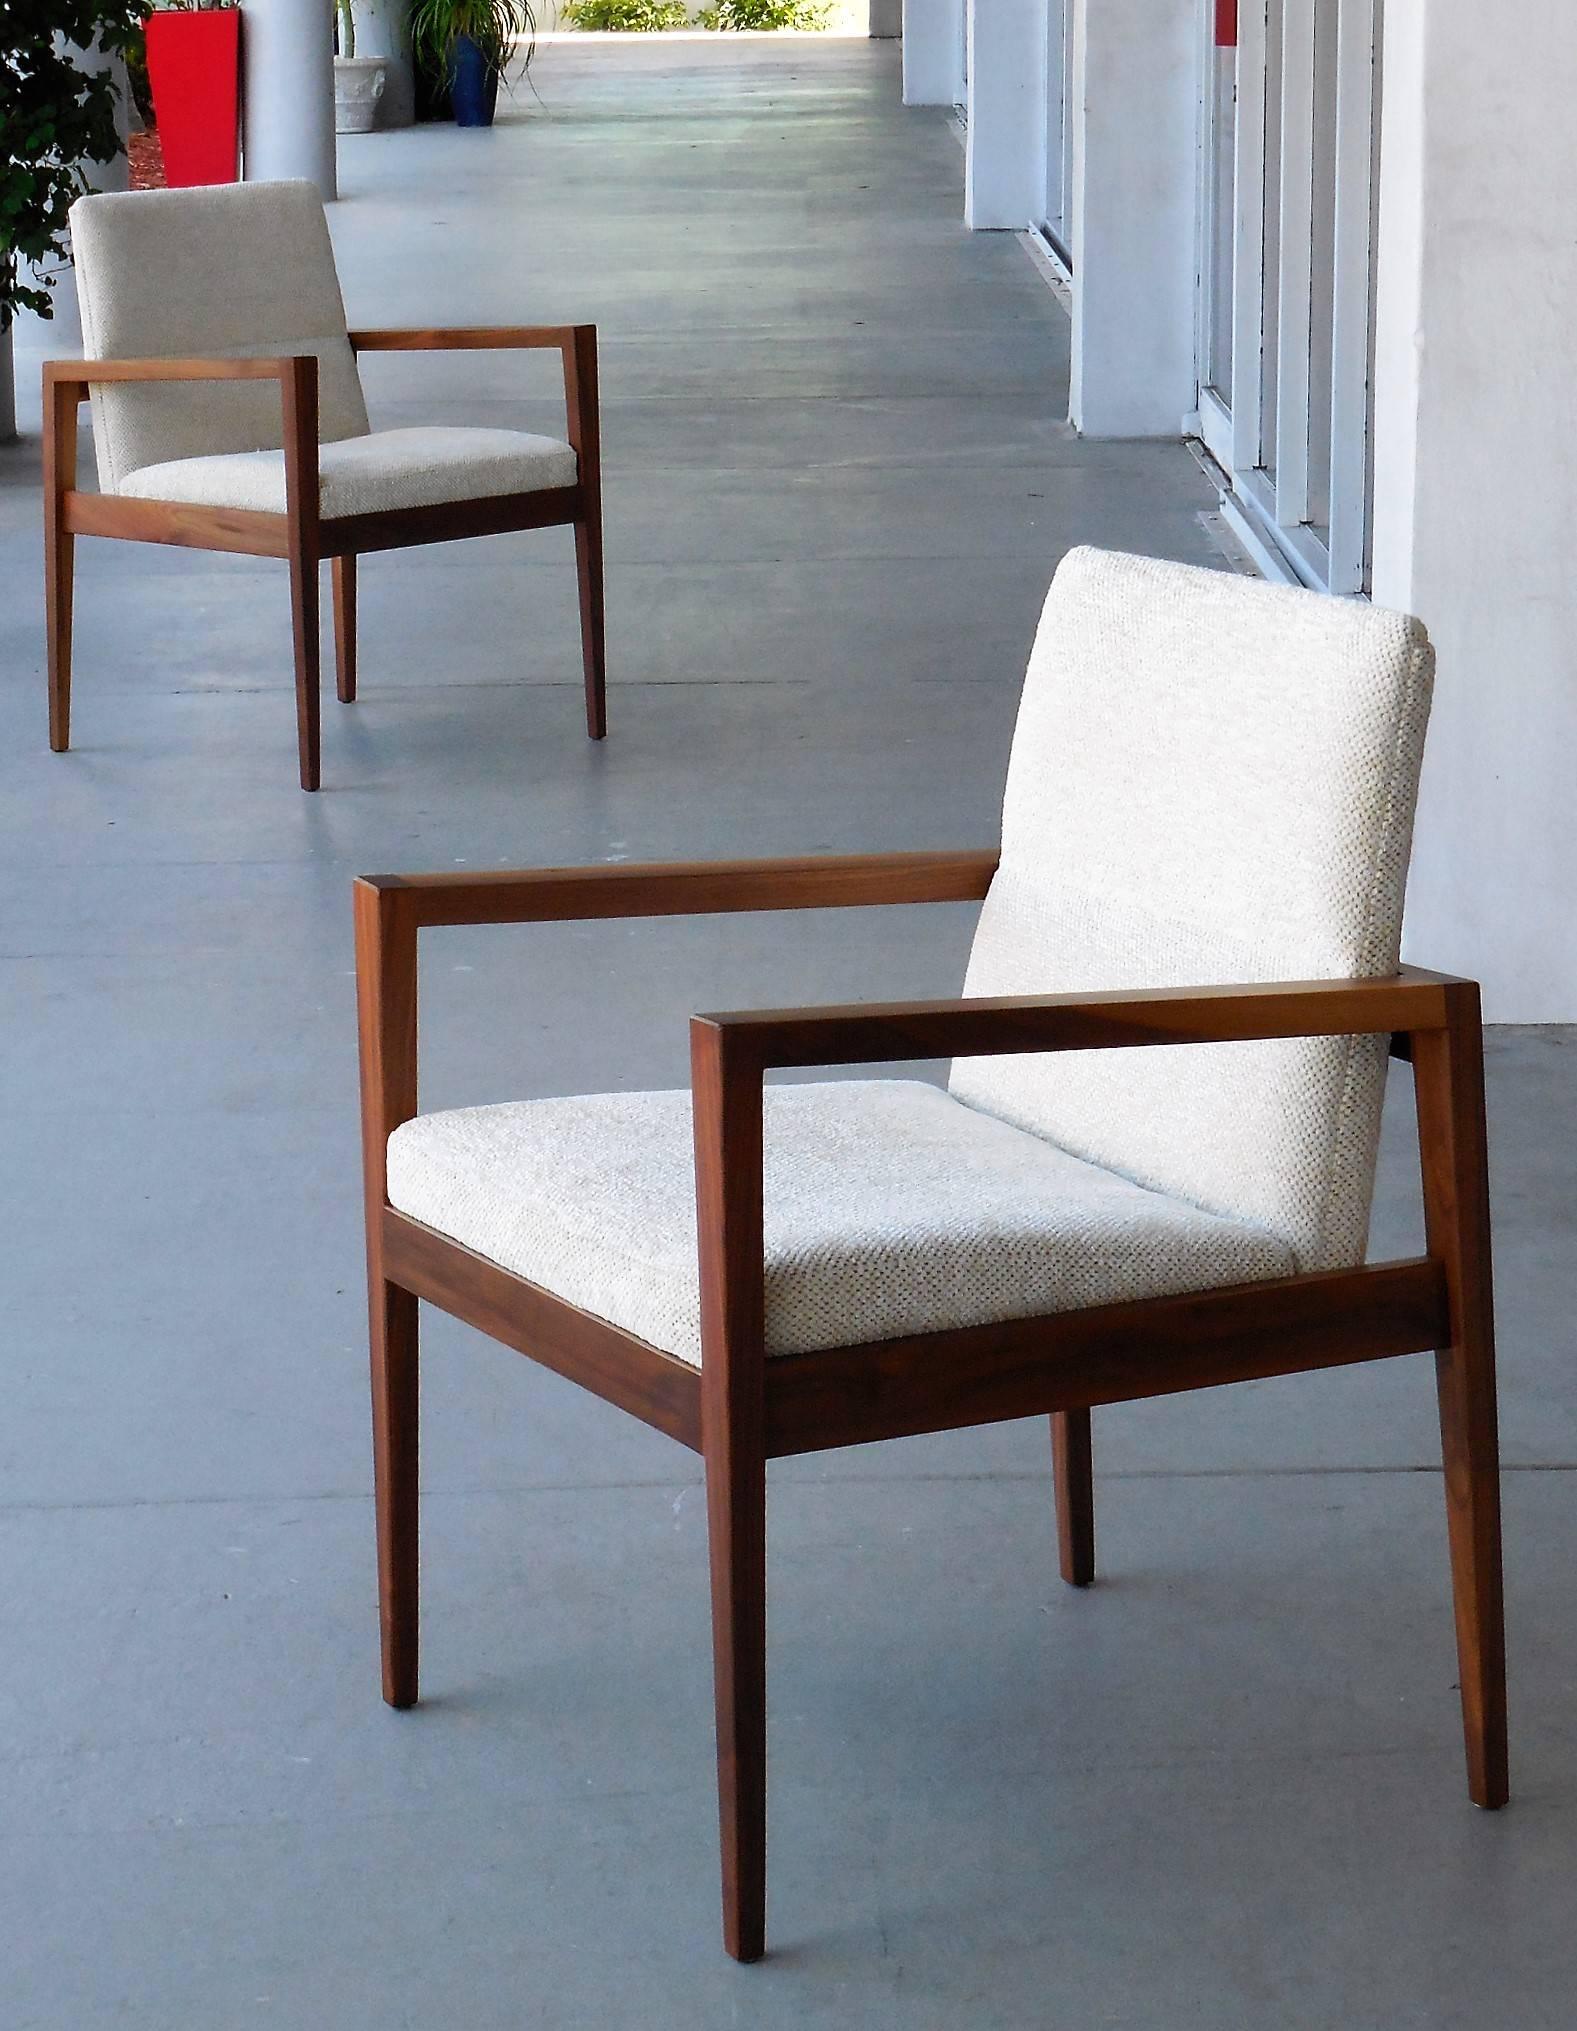 Pair of chairs by Jens Risom. Solid walnut frames with upholstered seats. Handsome design with amazing grain on the wood.